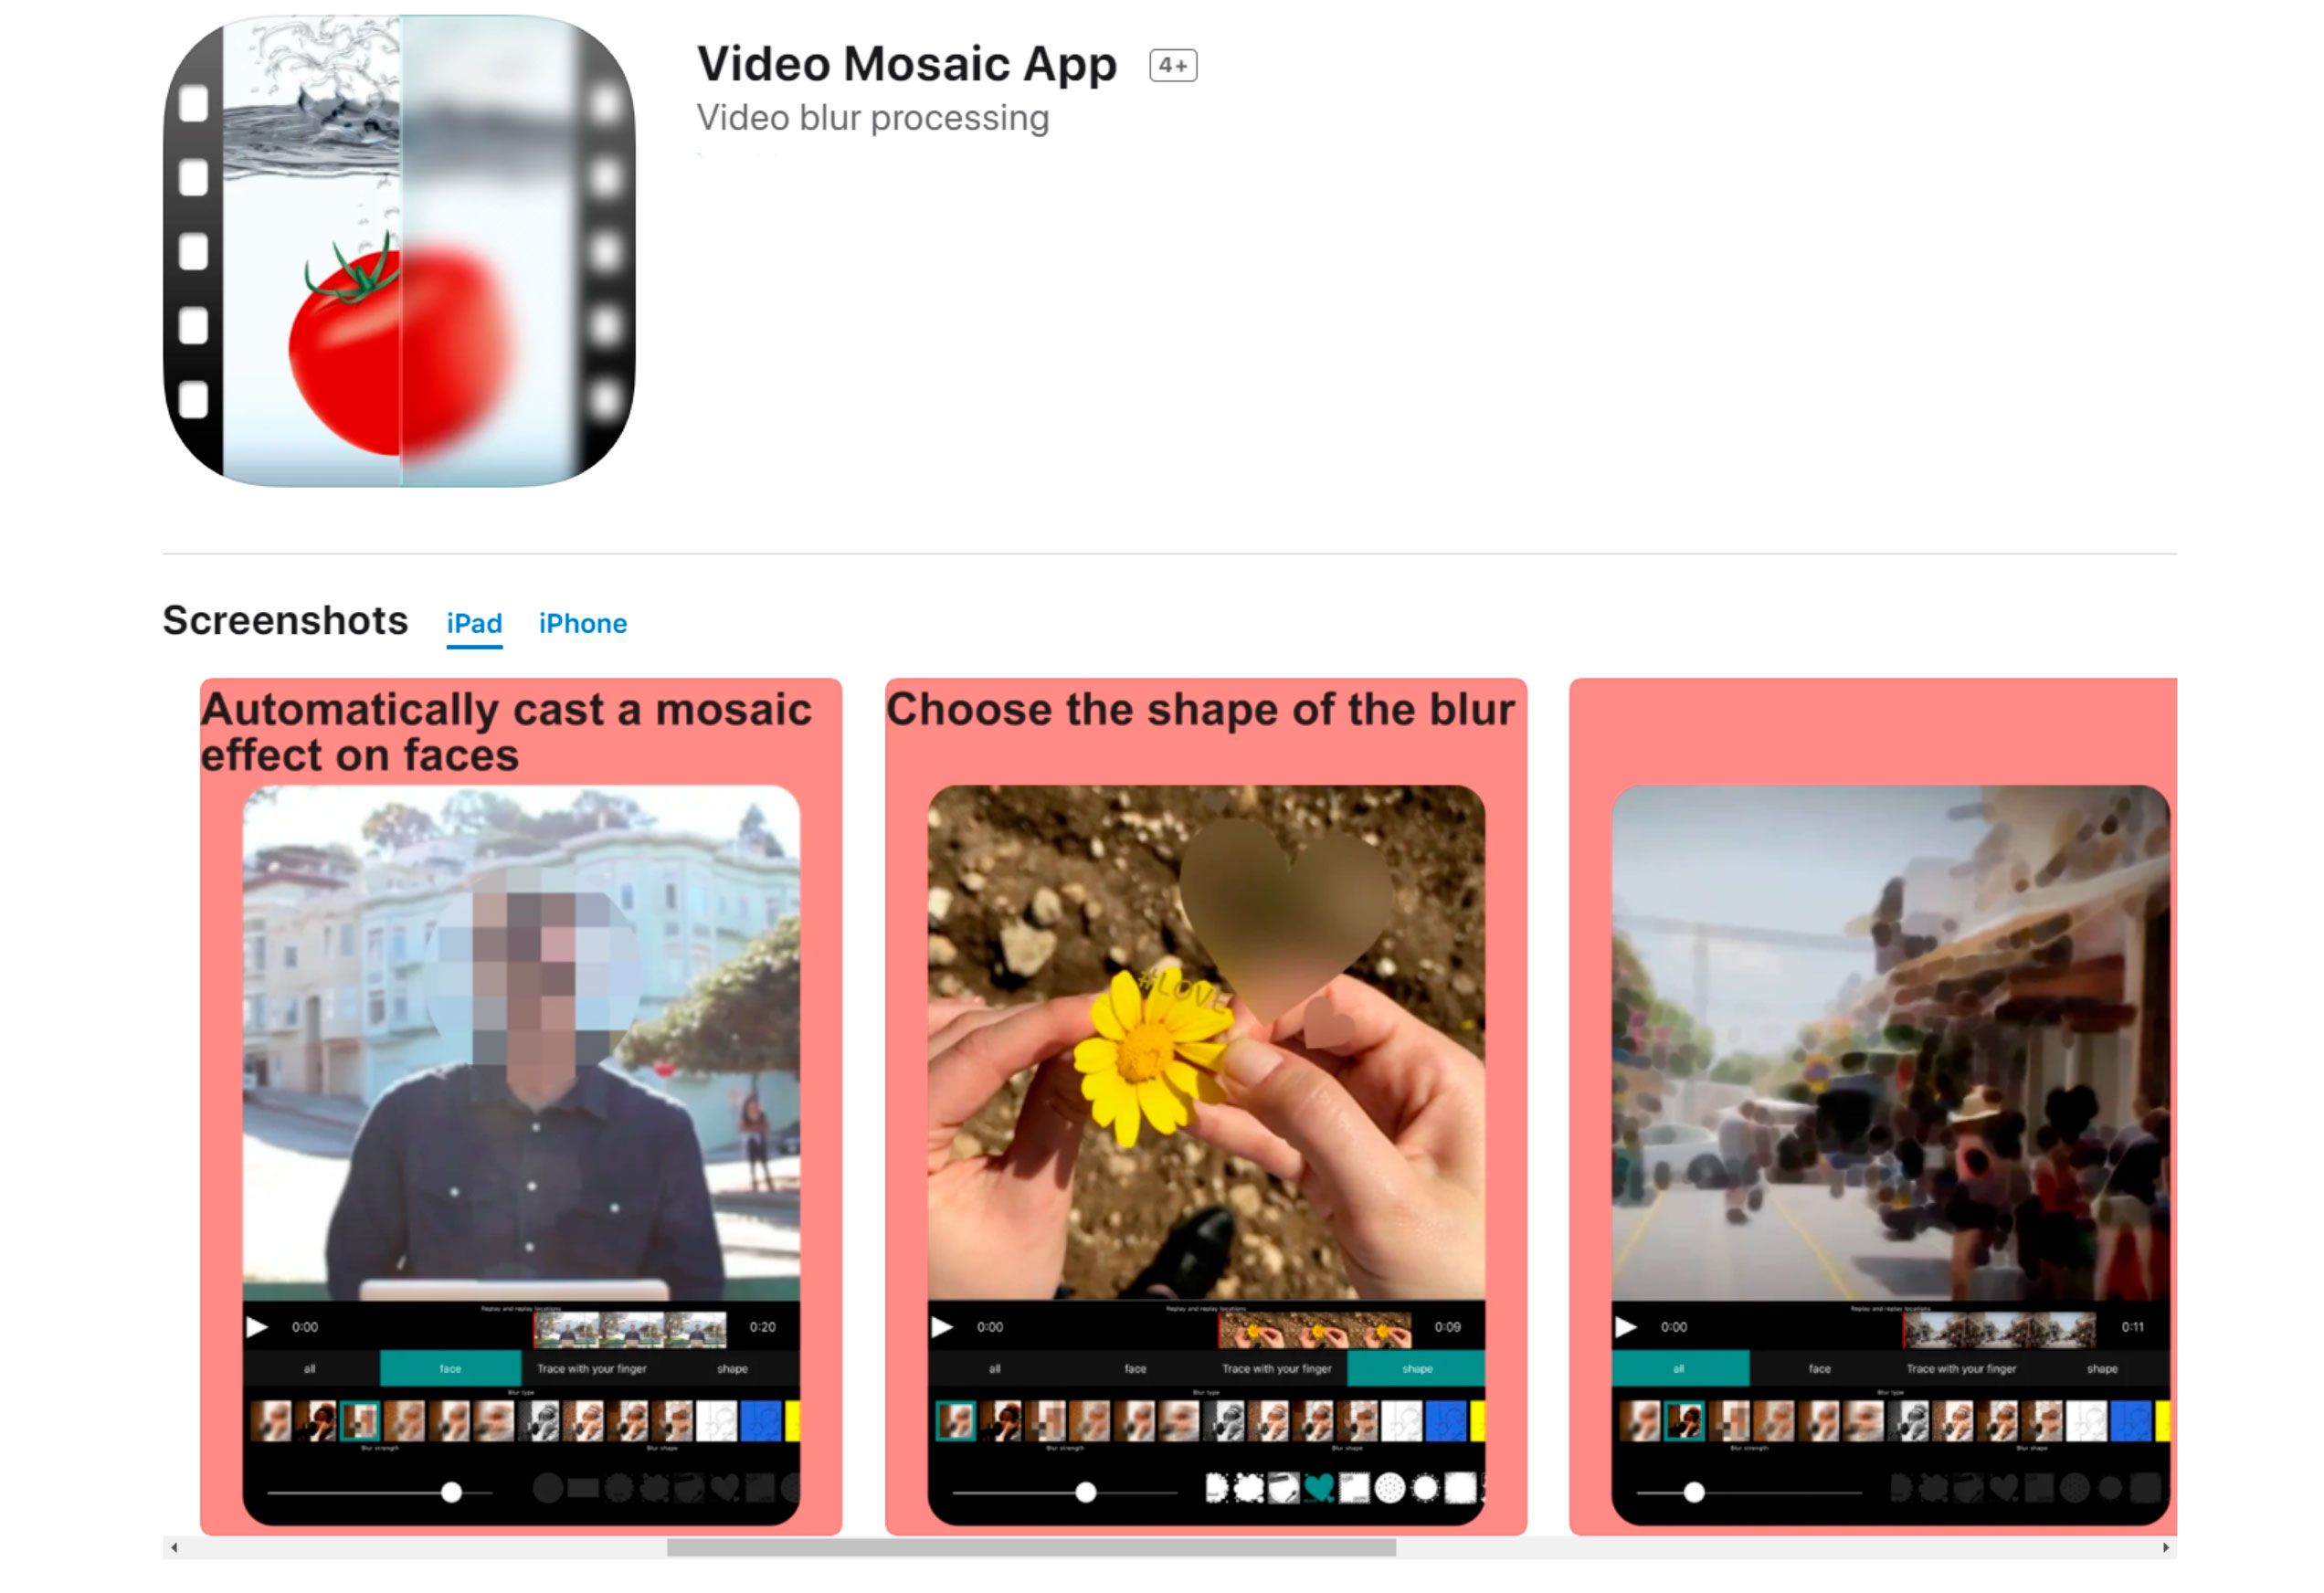 Video Mosaic Apps for iOS phones to blur faces in video..